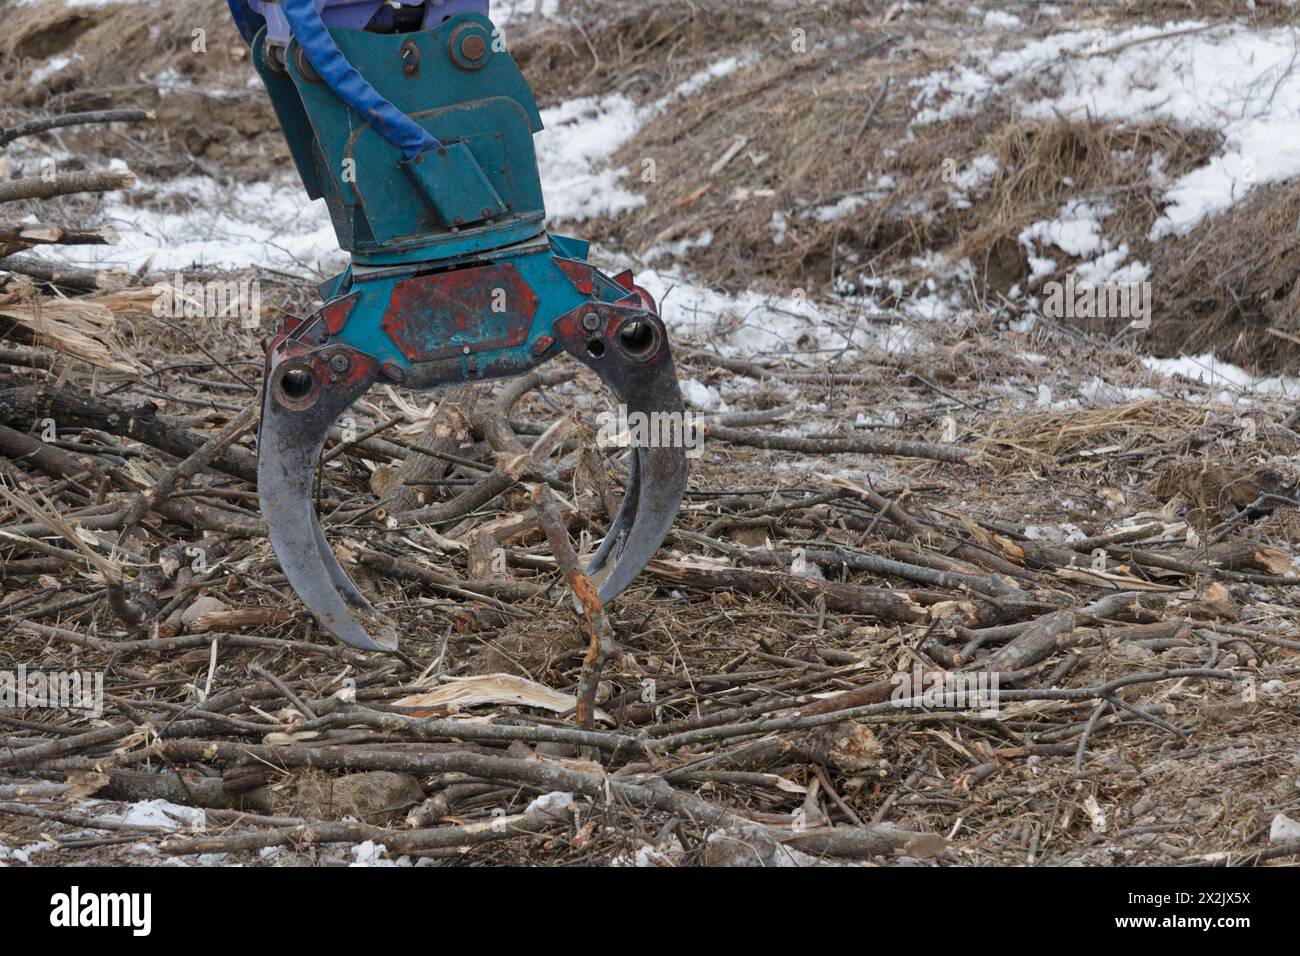 Industrial log grabber grapple machinery Stock Photo